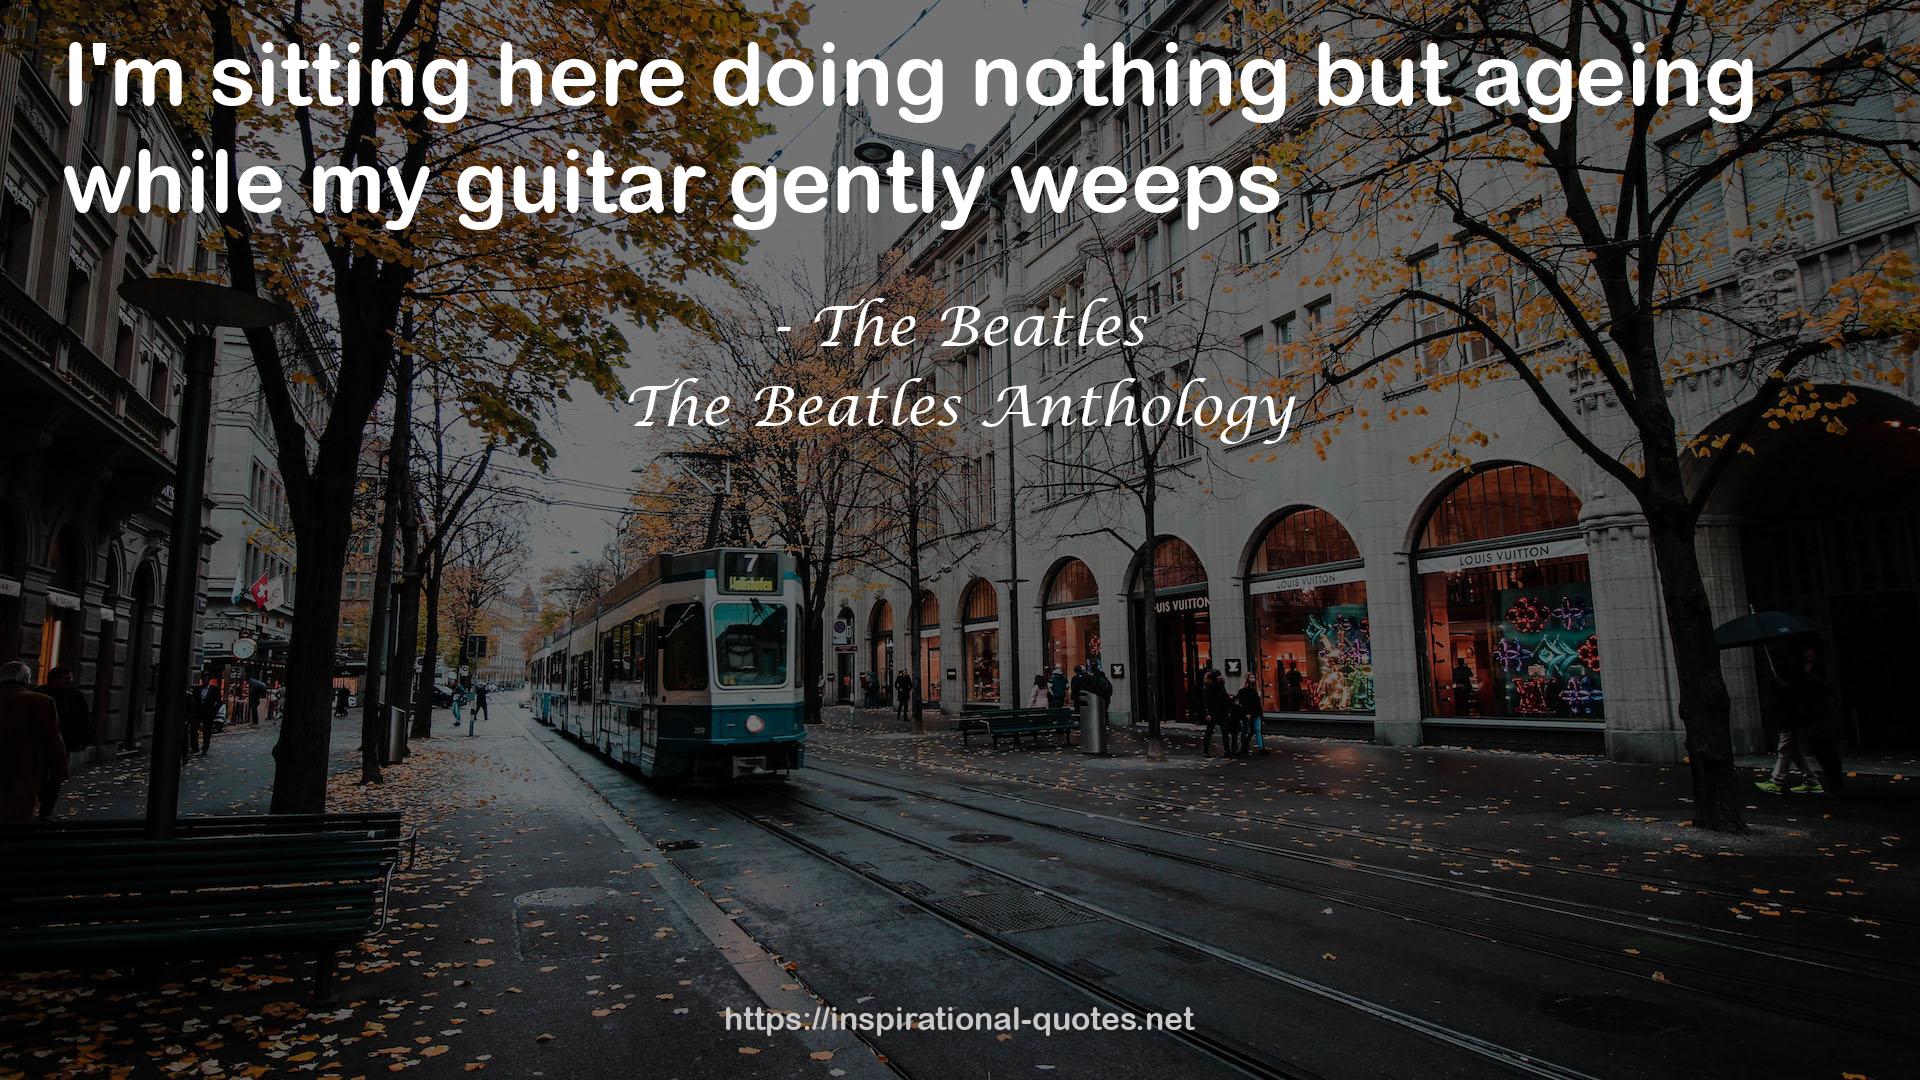 The Beatles Anthology QUOTES